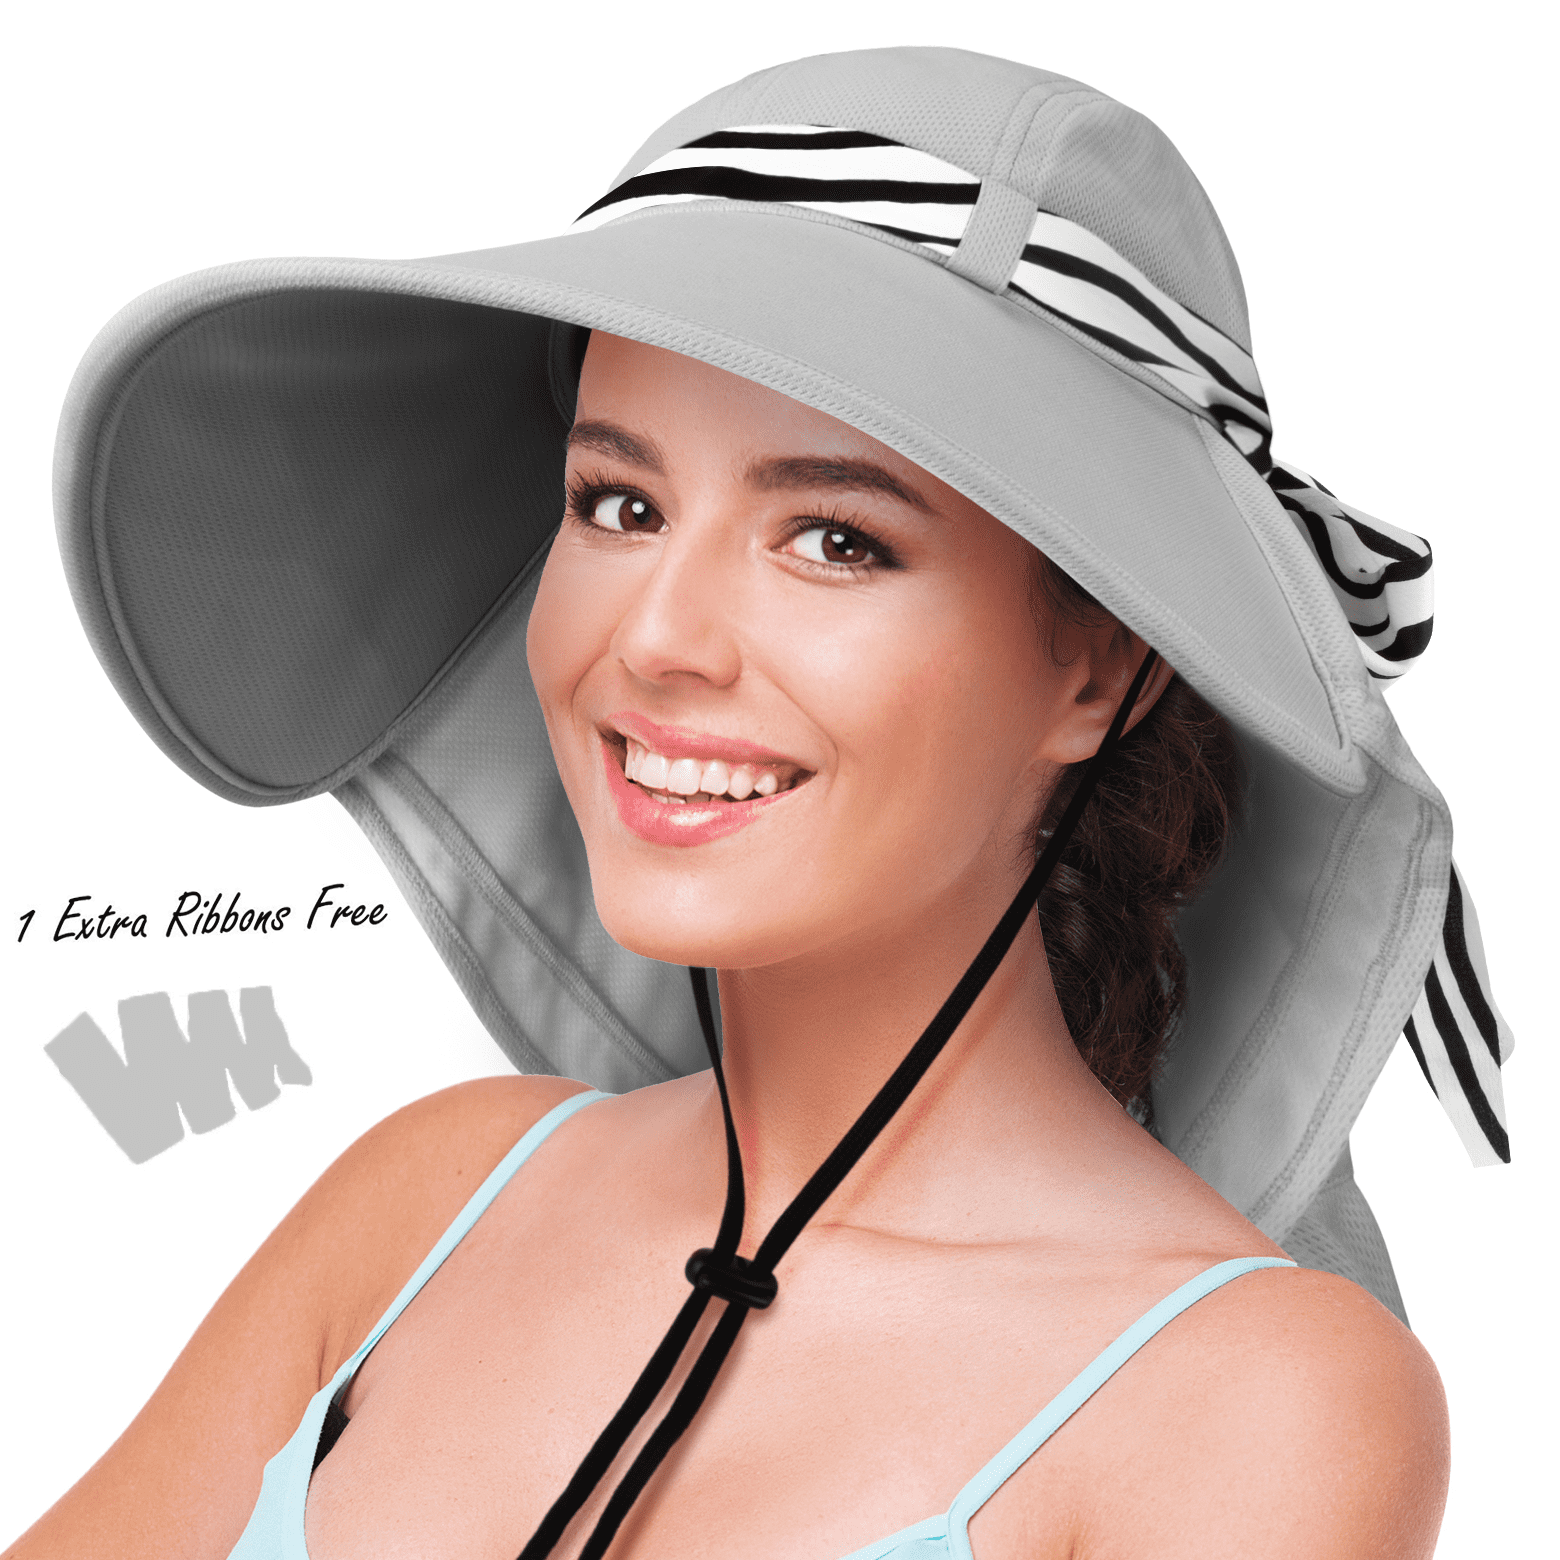 Outdoor UV Protection Sun Hat Neck Face Flap Wide Brim Cap for Fishing Hiking US 